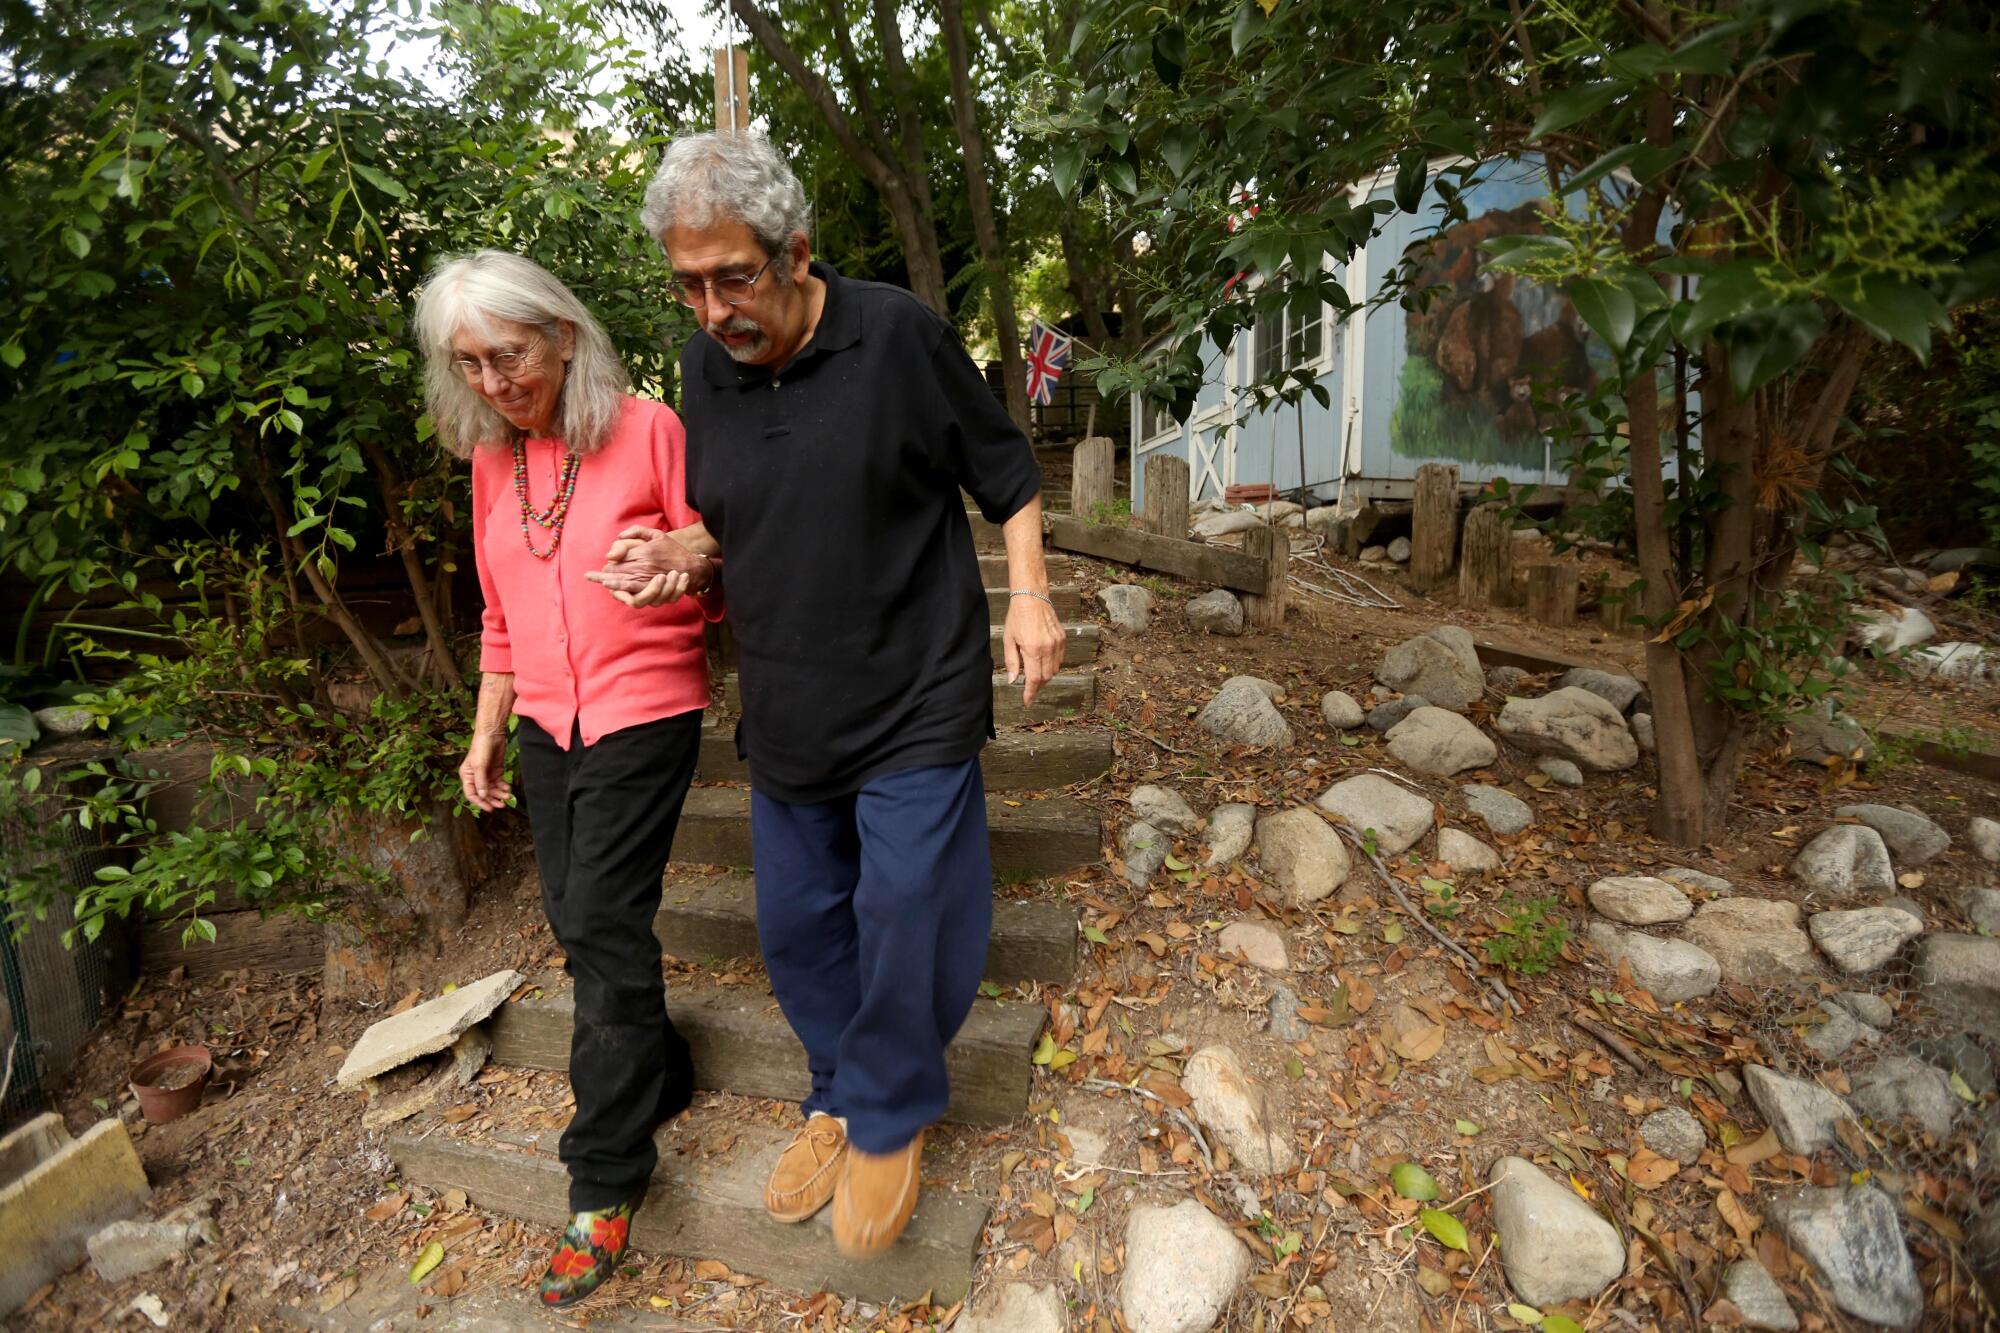 A woman and man hold hands while walking in a backyard